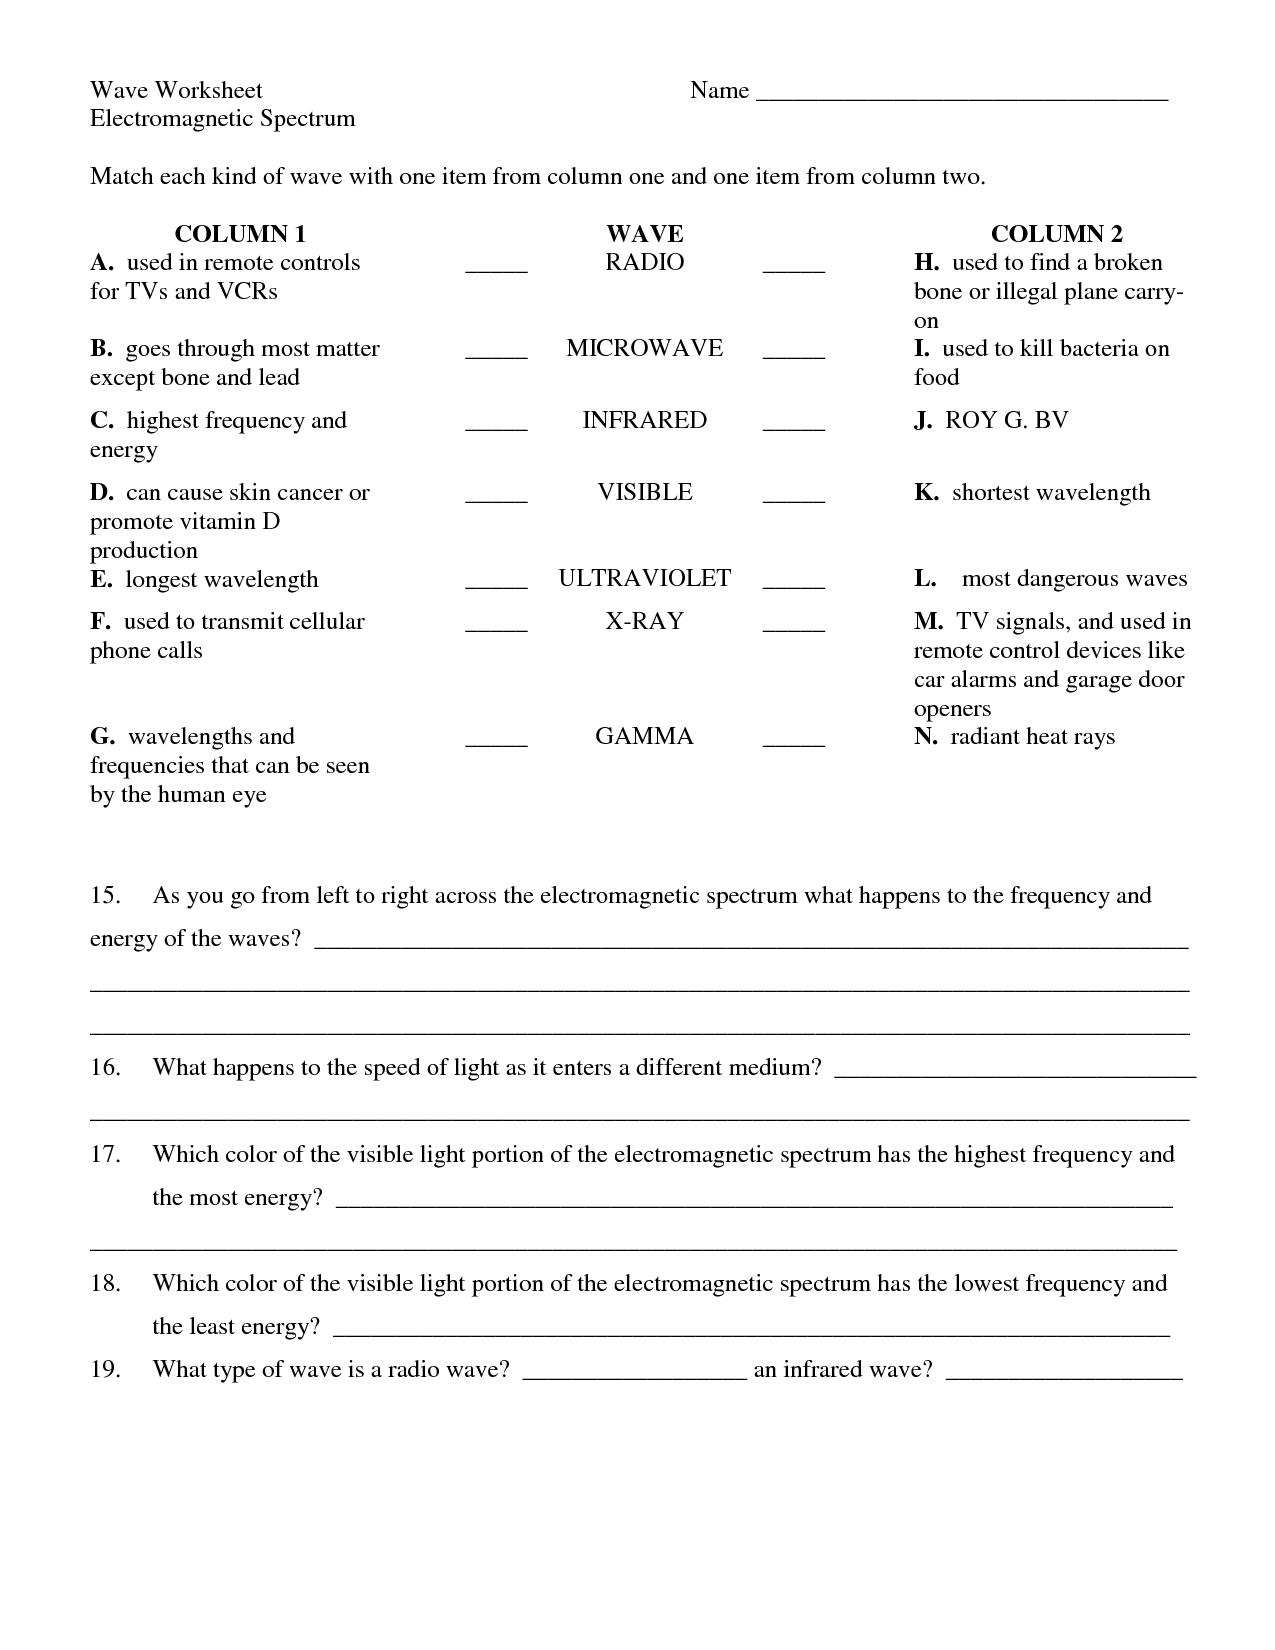 waves-and-electromagnetic-spectrum-worksheet-answers